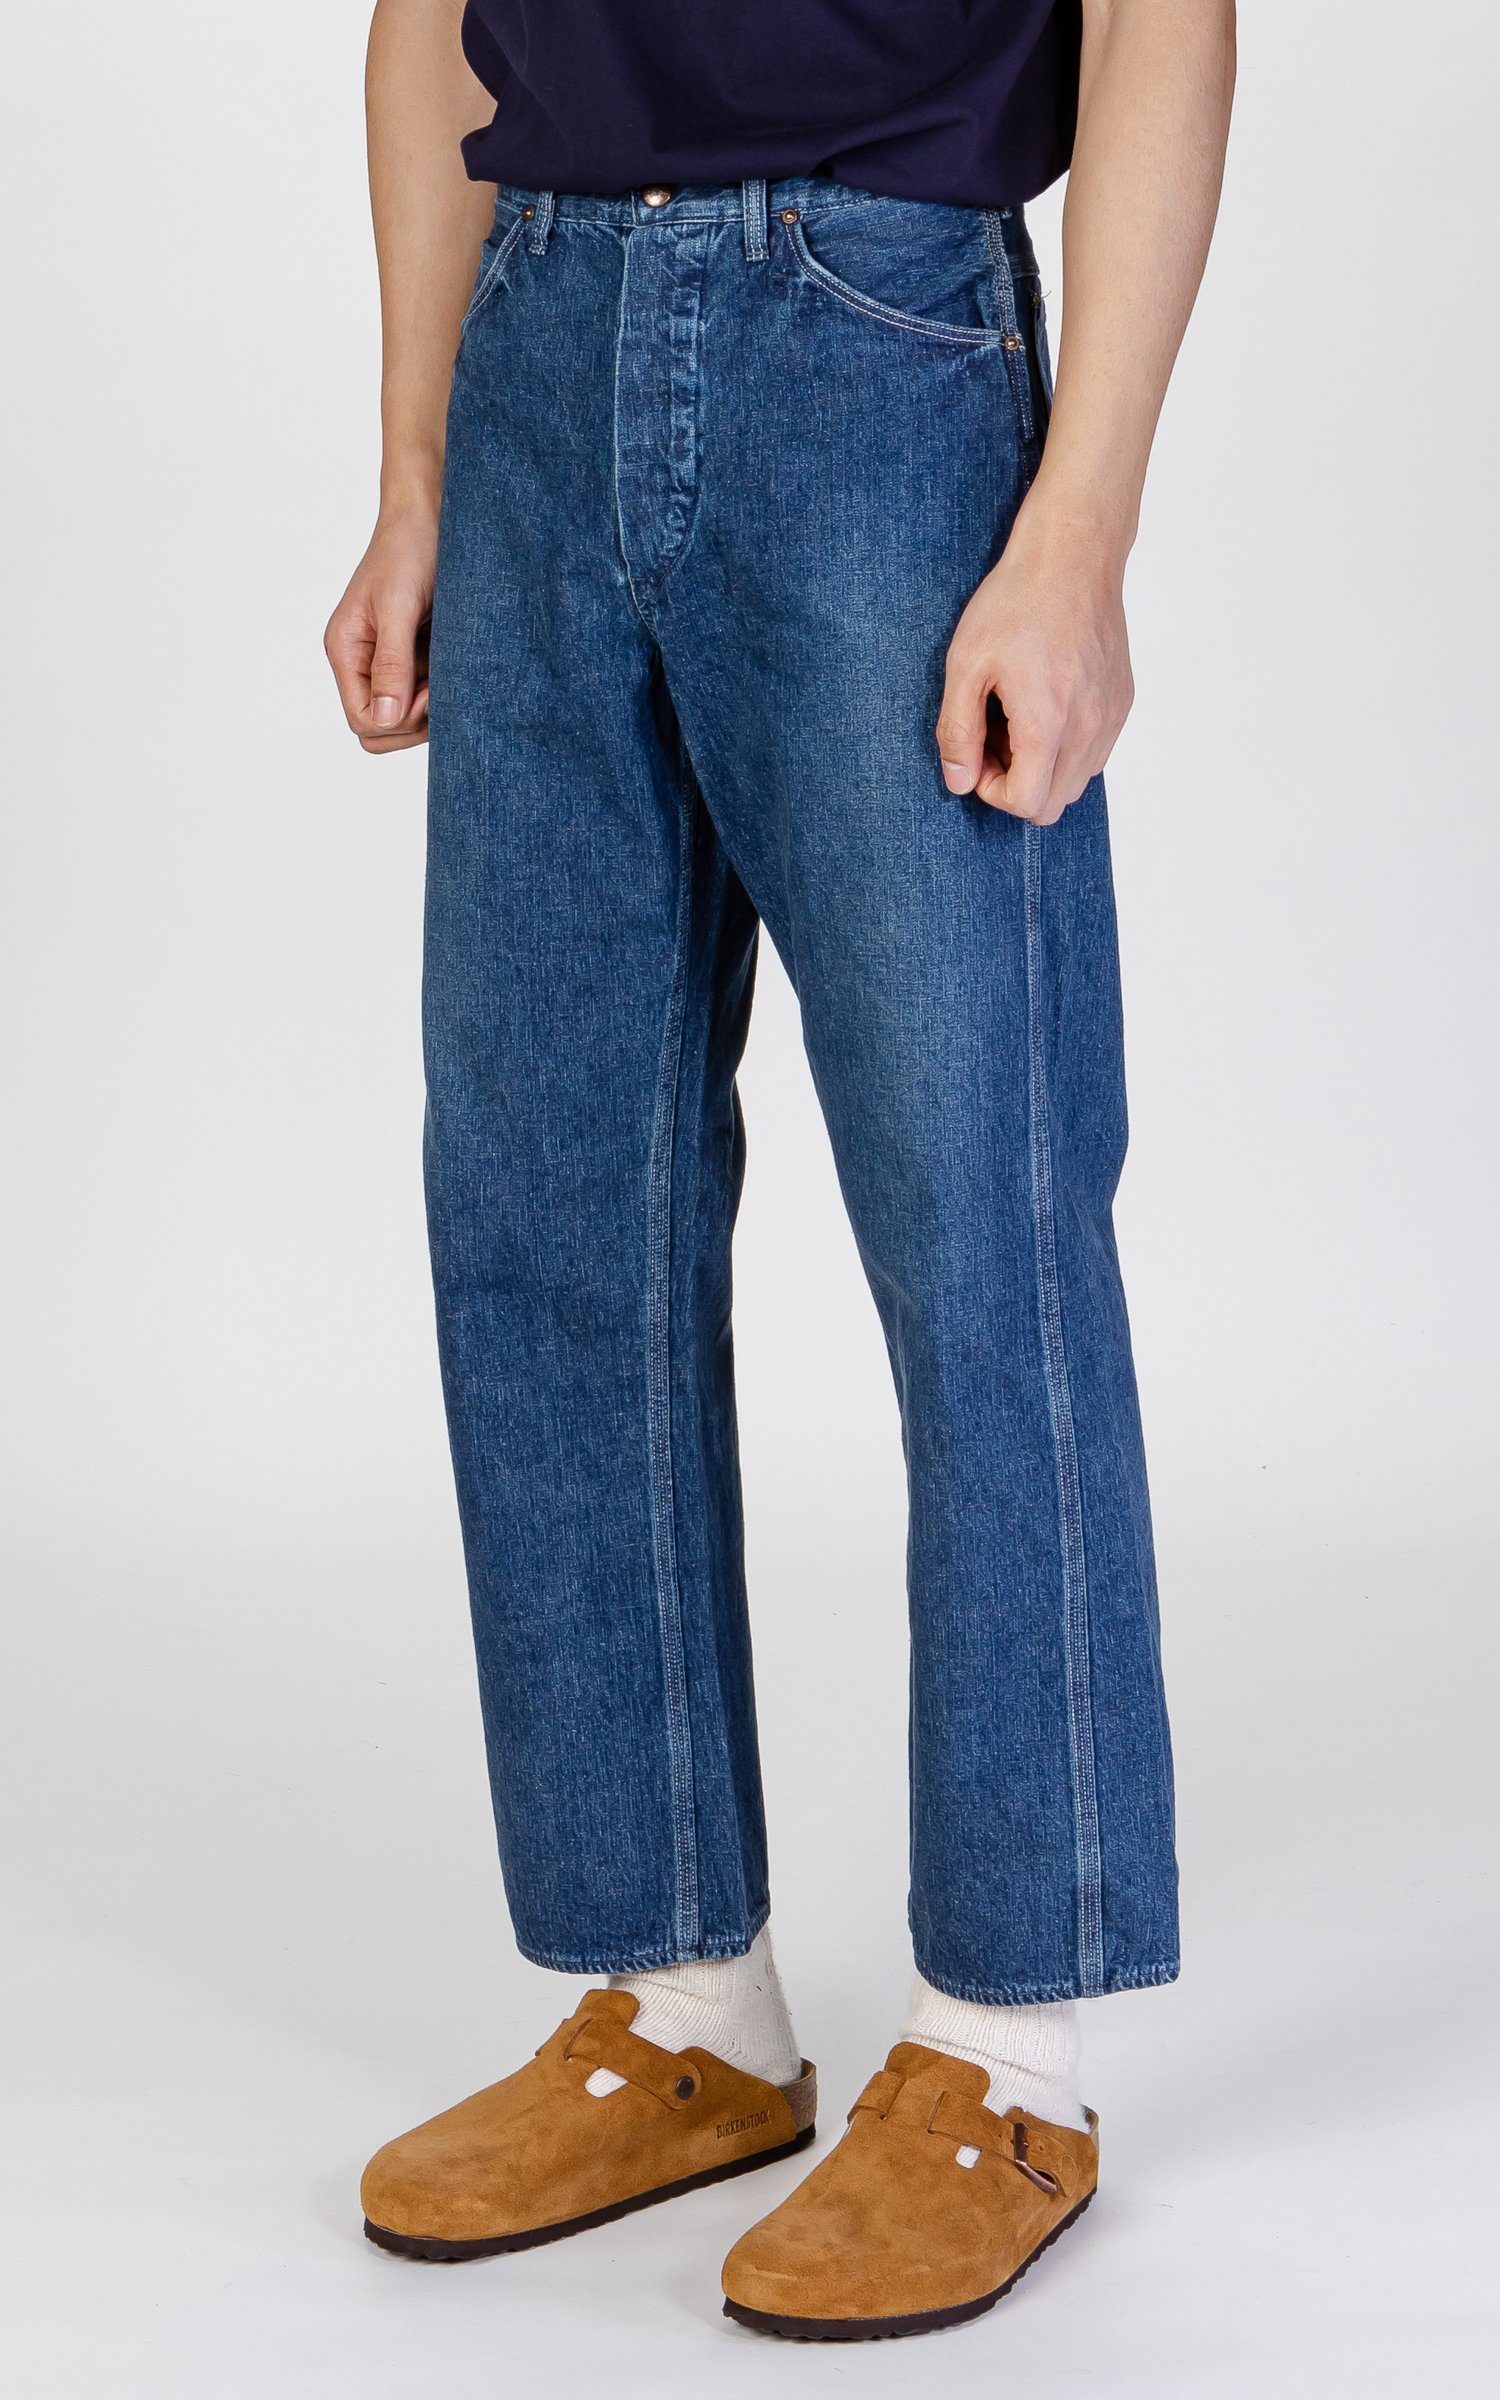 OrSlow Painter Pants Denim Used 2 Years Wash | Cultizm